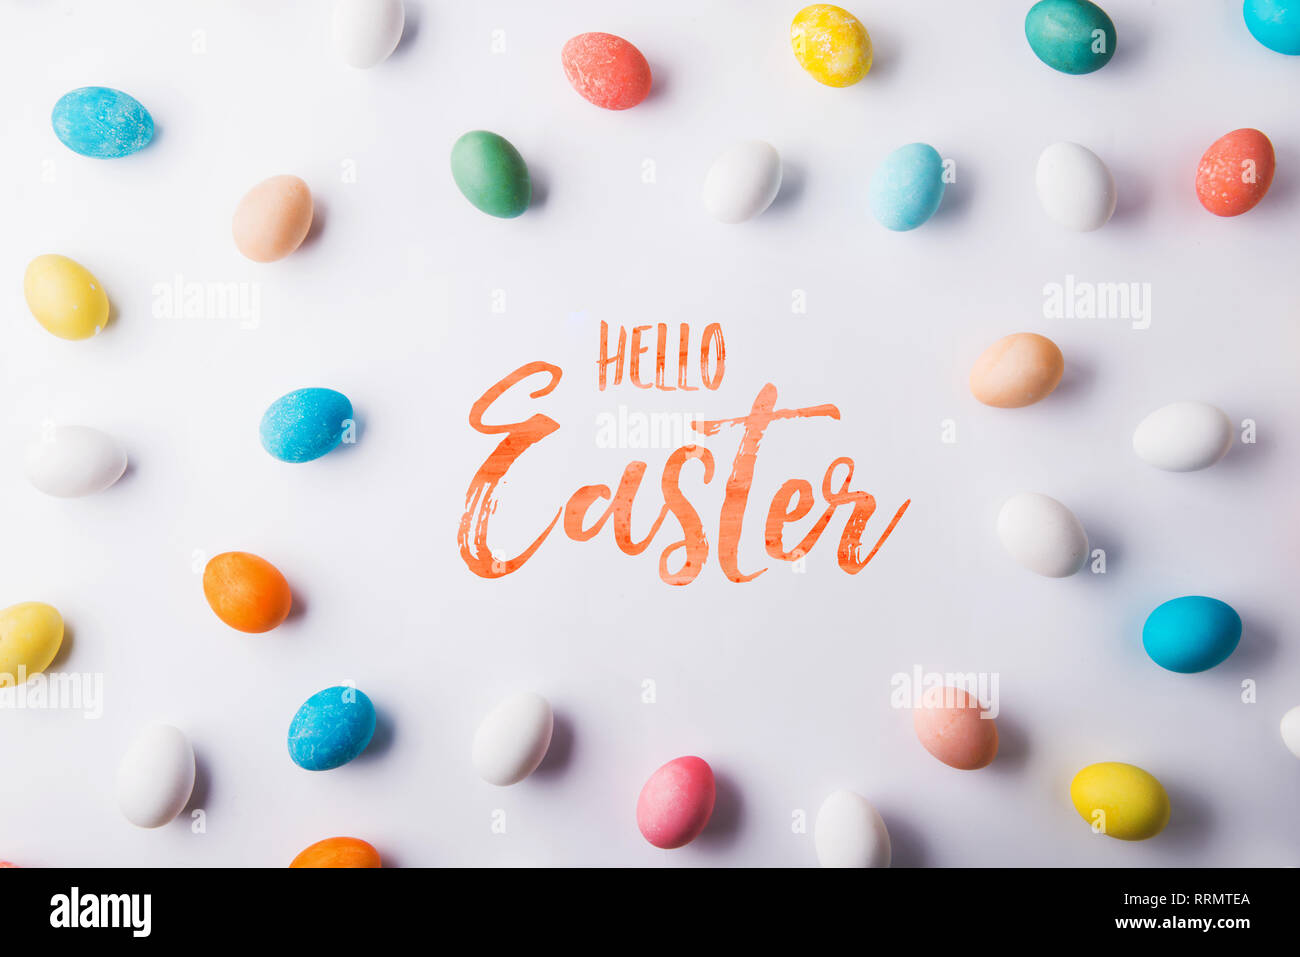 Hello Easter phrase and eggs on a white background. Studio shot. Flat lay. Stock Photo